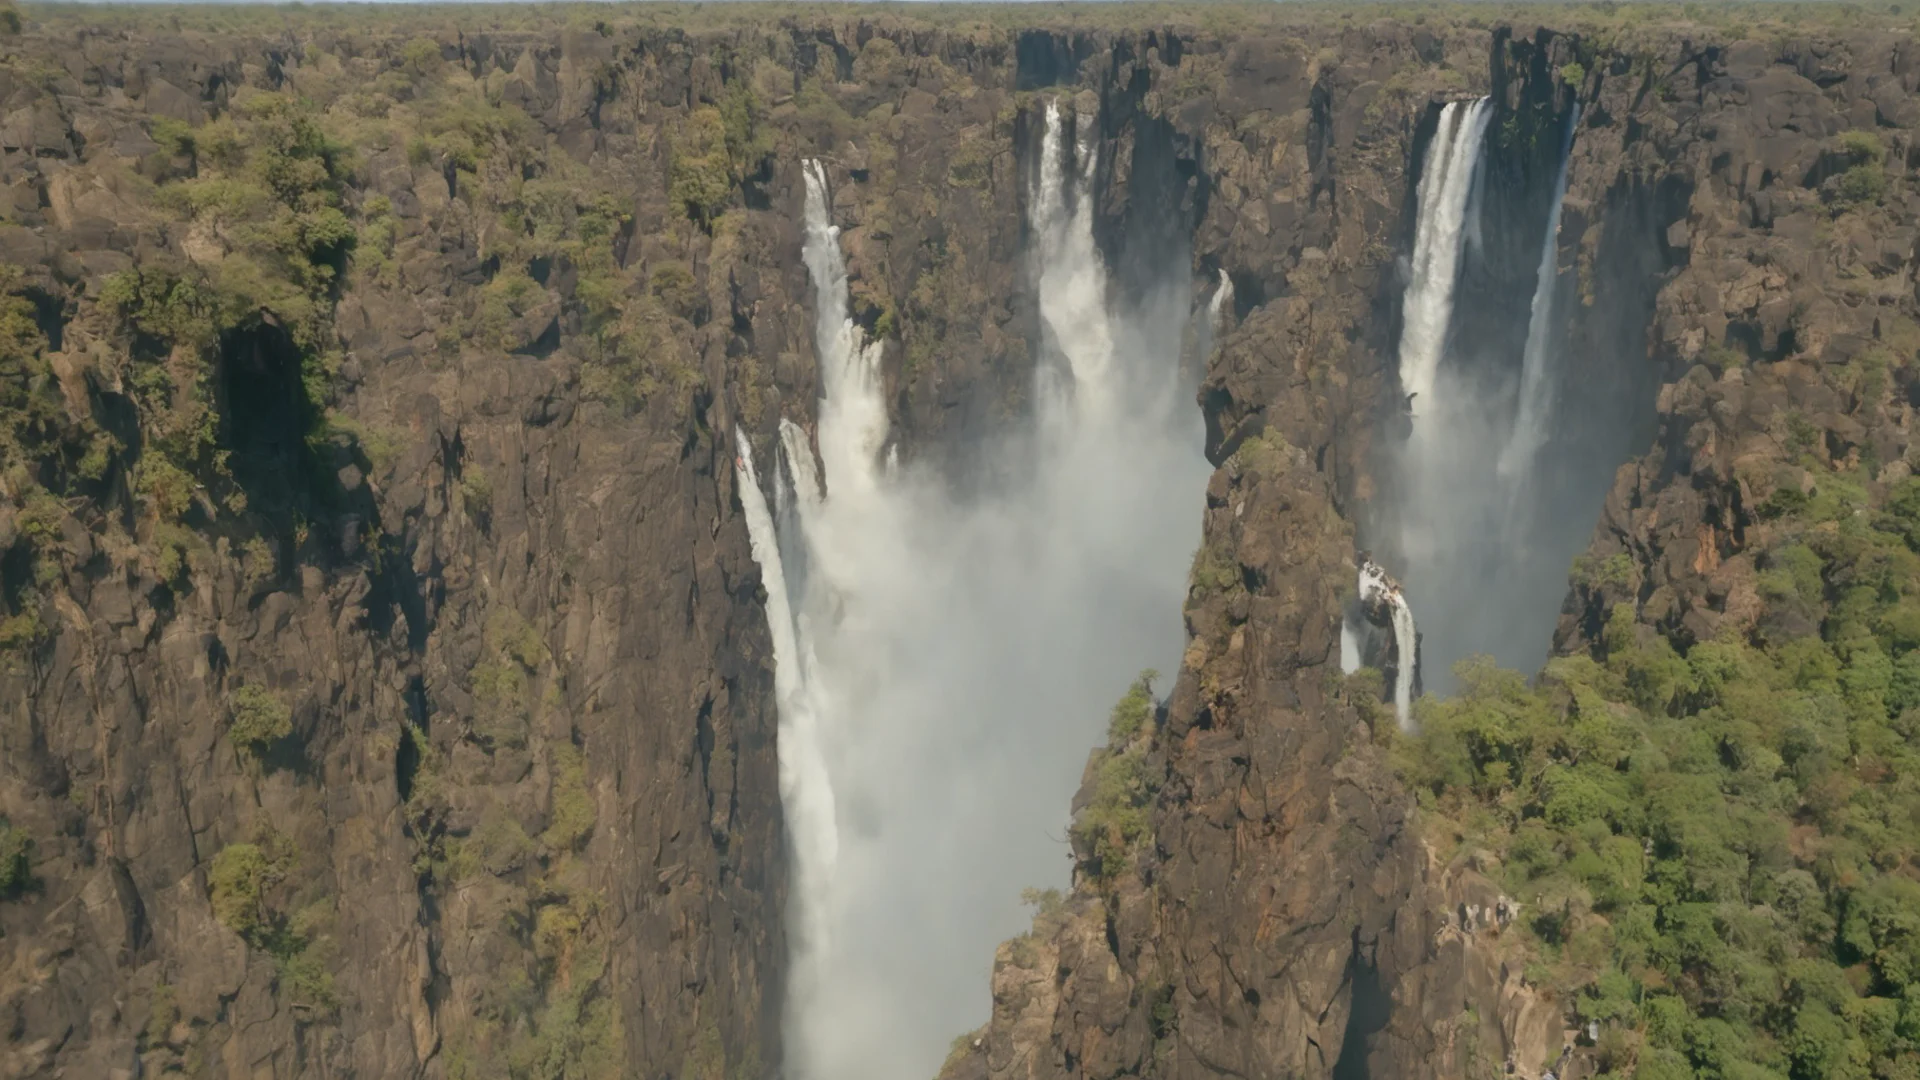 an expedition to victoria falls %7C advanced equipment %7C national geographic shot %7C dramatic scene wide